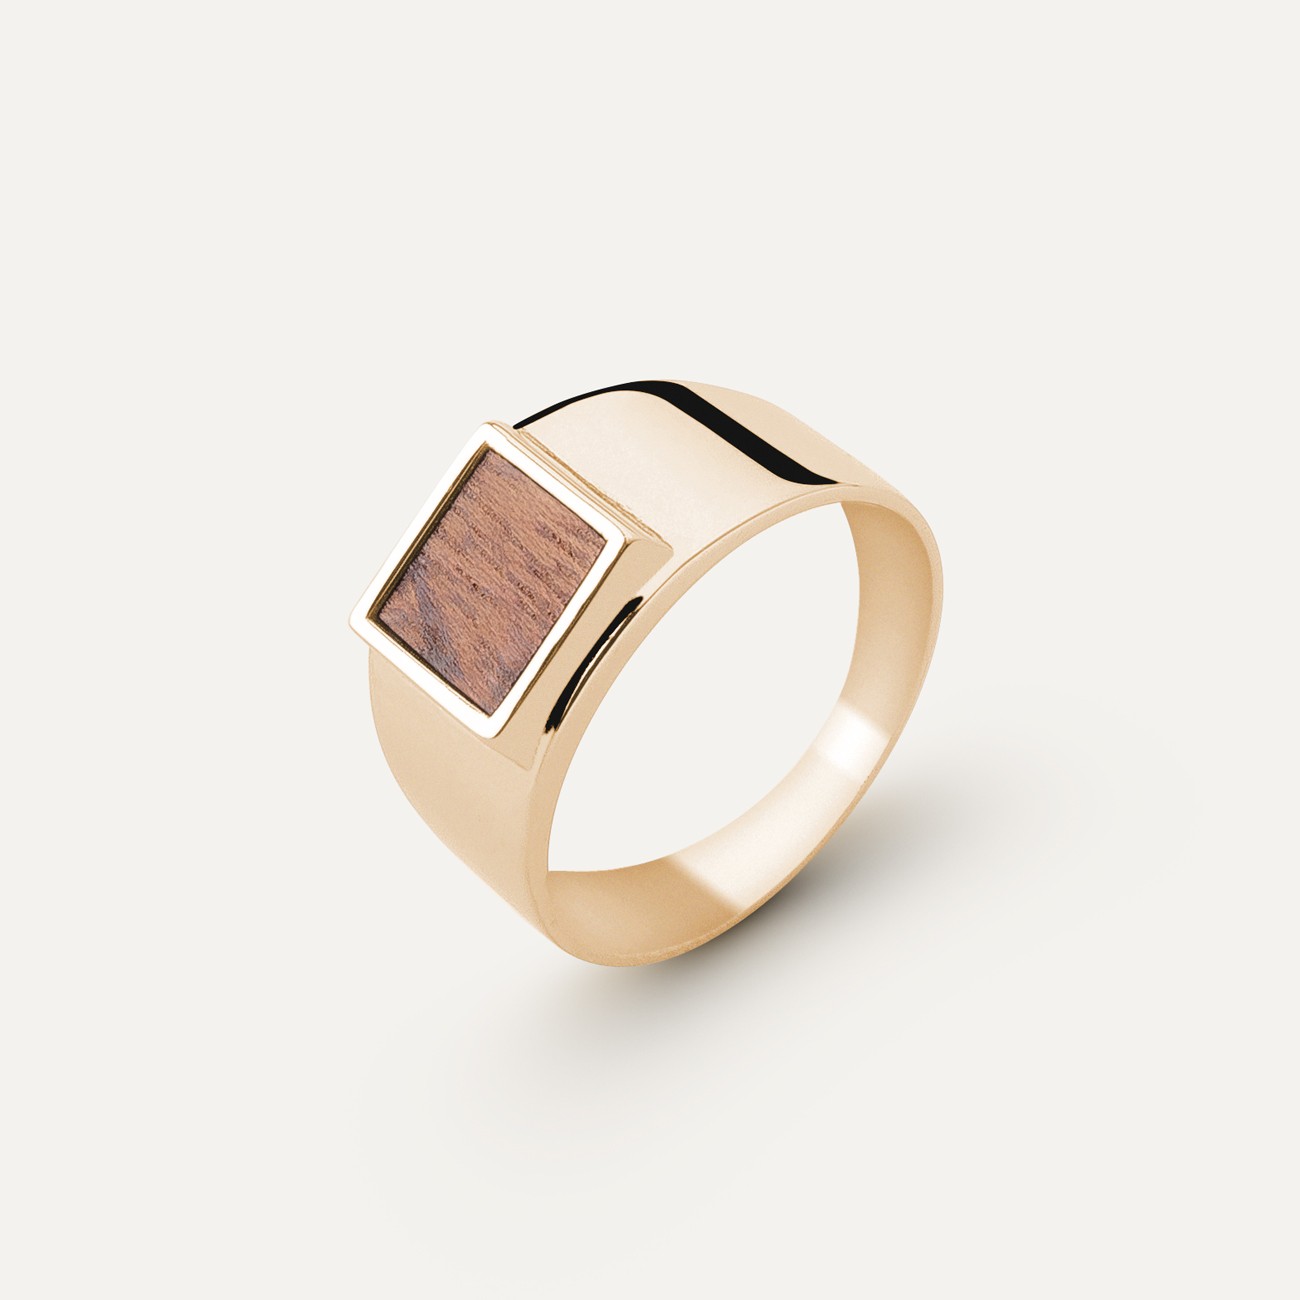 Square signet ring with resin